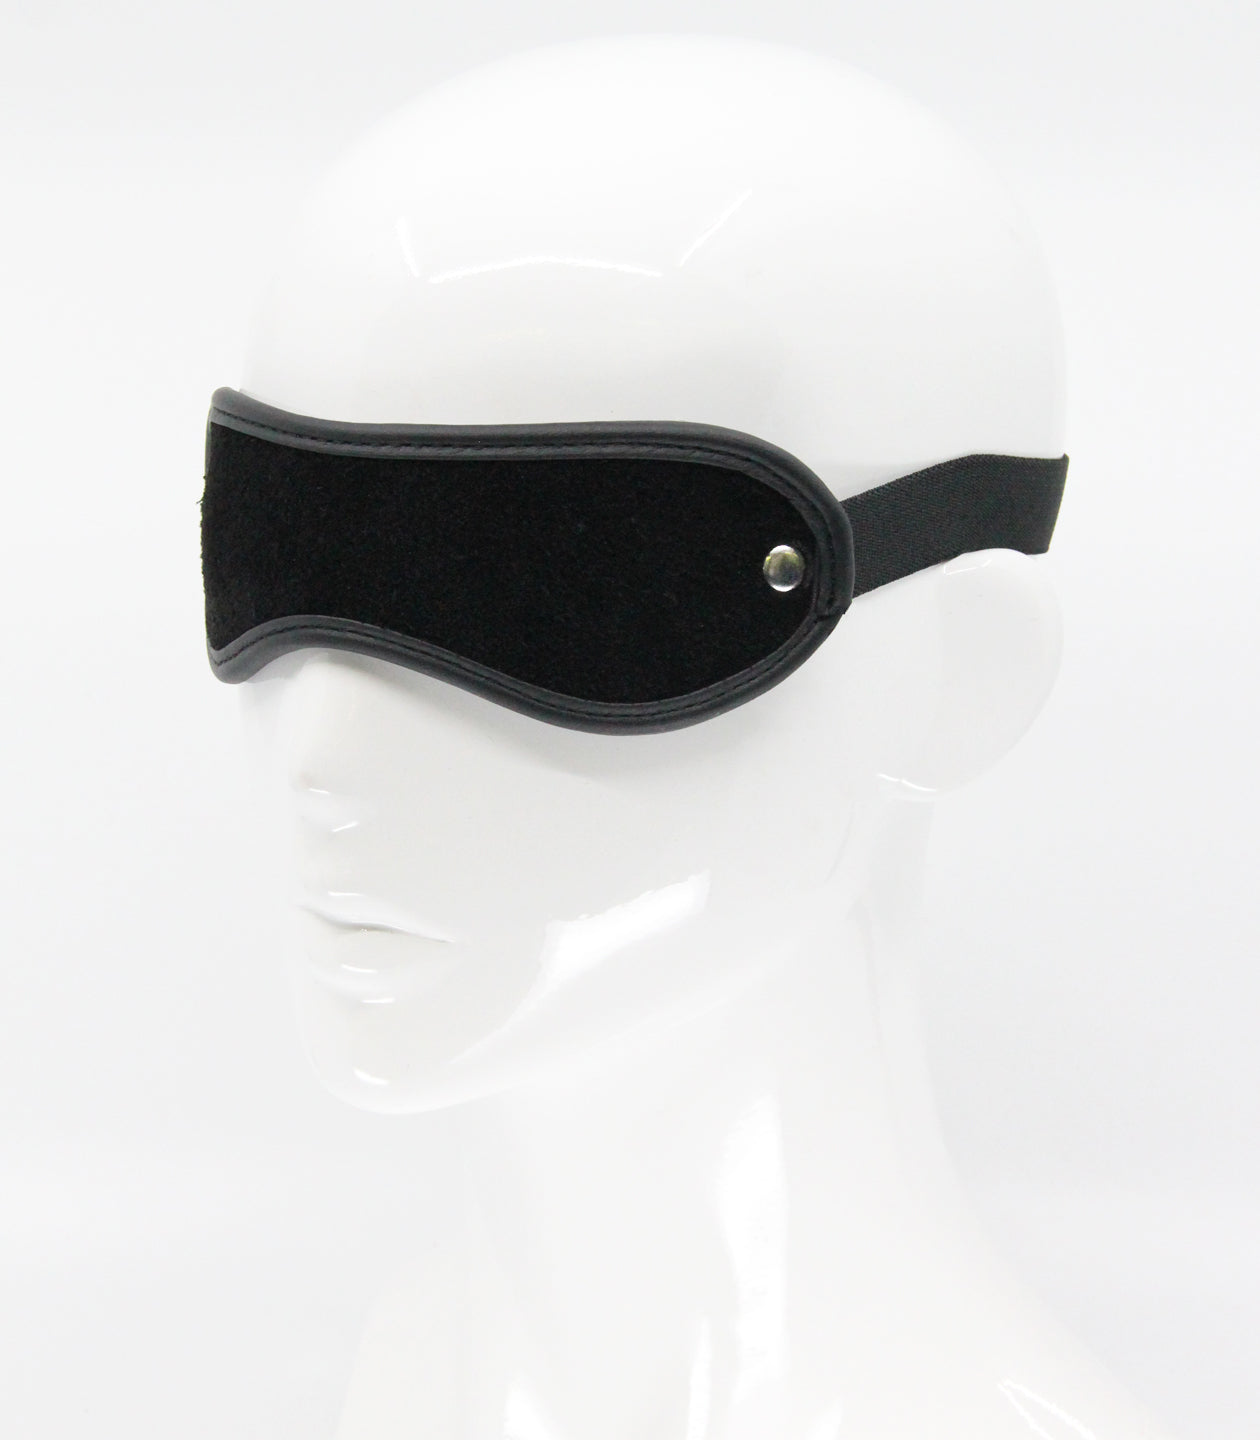 Bli027 Suede Leather Blindfold  - Club X